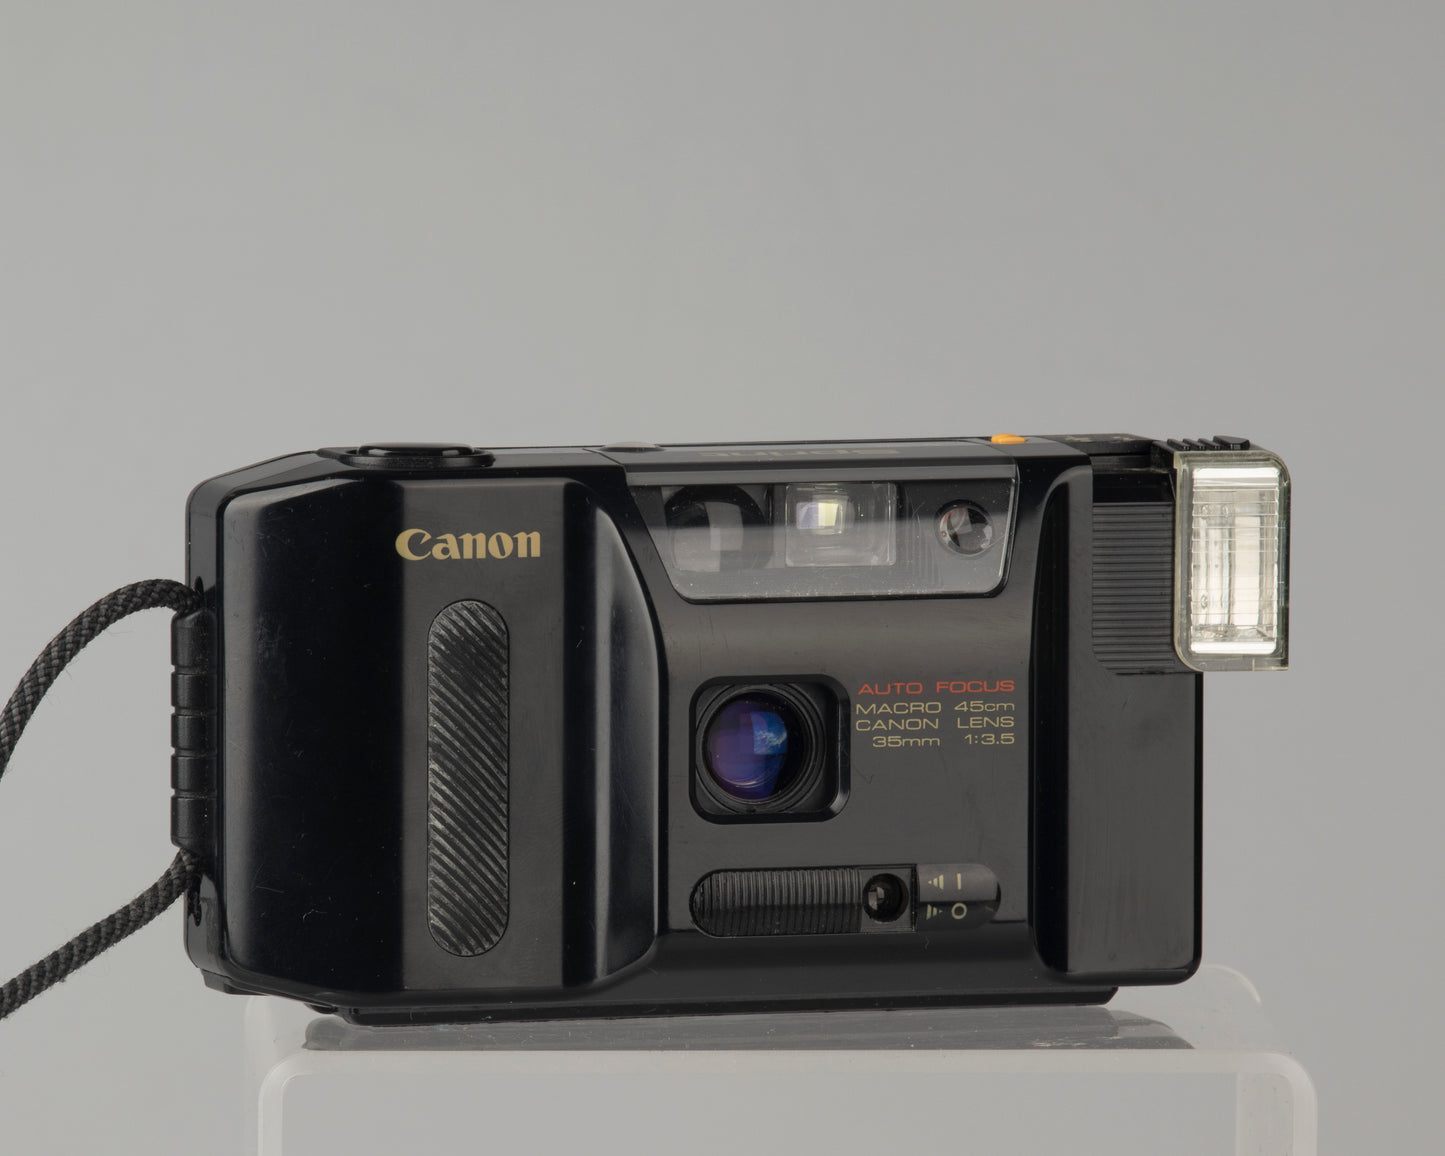 Canon Sprint 35mm autofocus point and shoot camera with a 35mm f3.5 lens